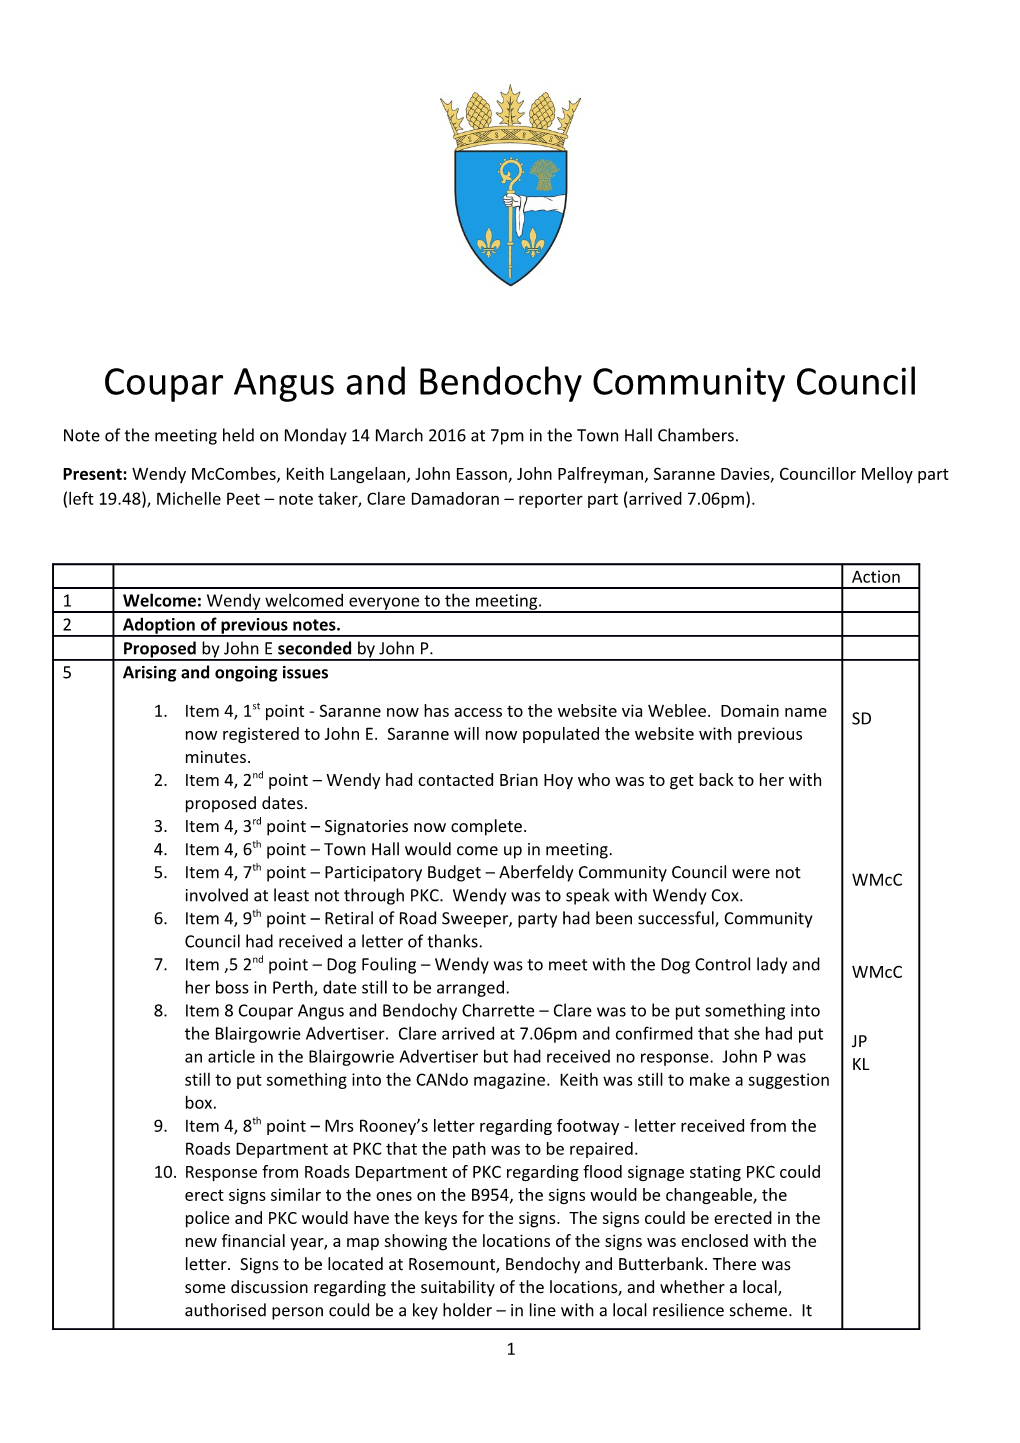 Coupar Angus and Bendochy Community Council